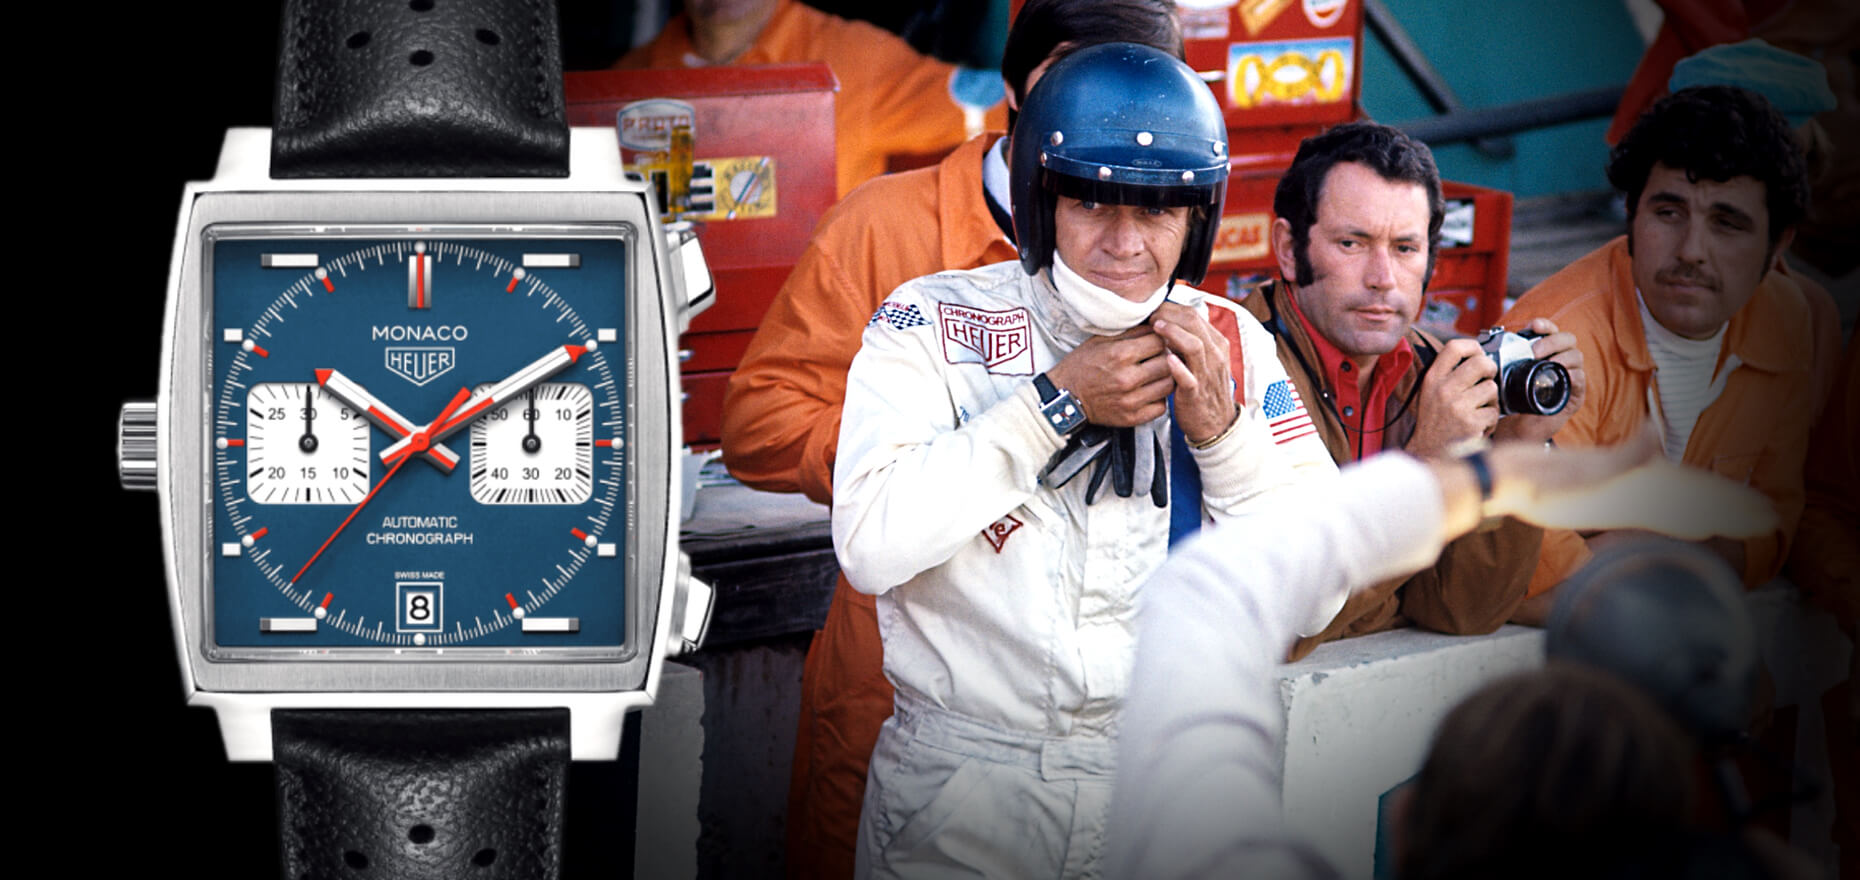 5 Facts you need to know about the TAG Heuer Monaco Calibre 11